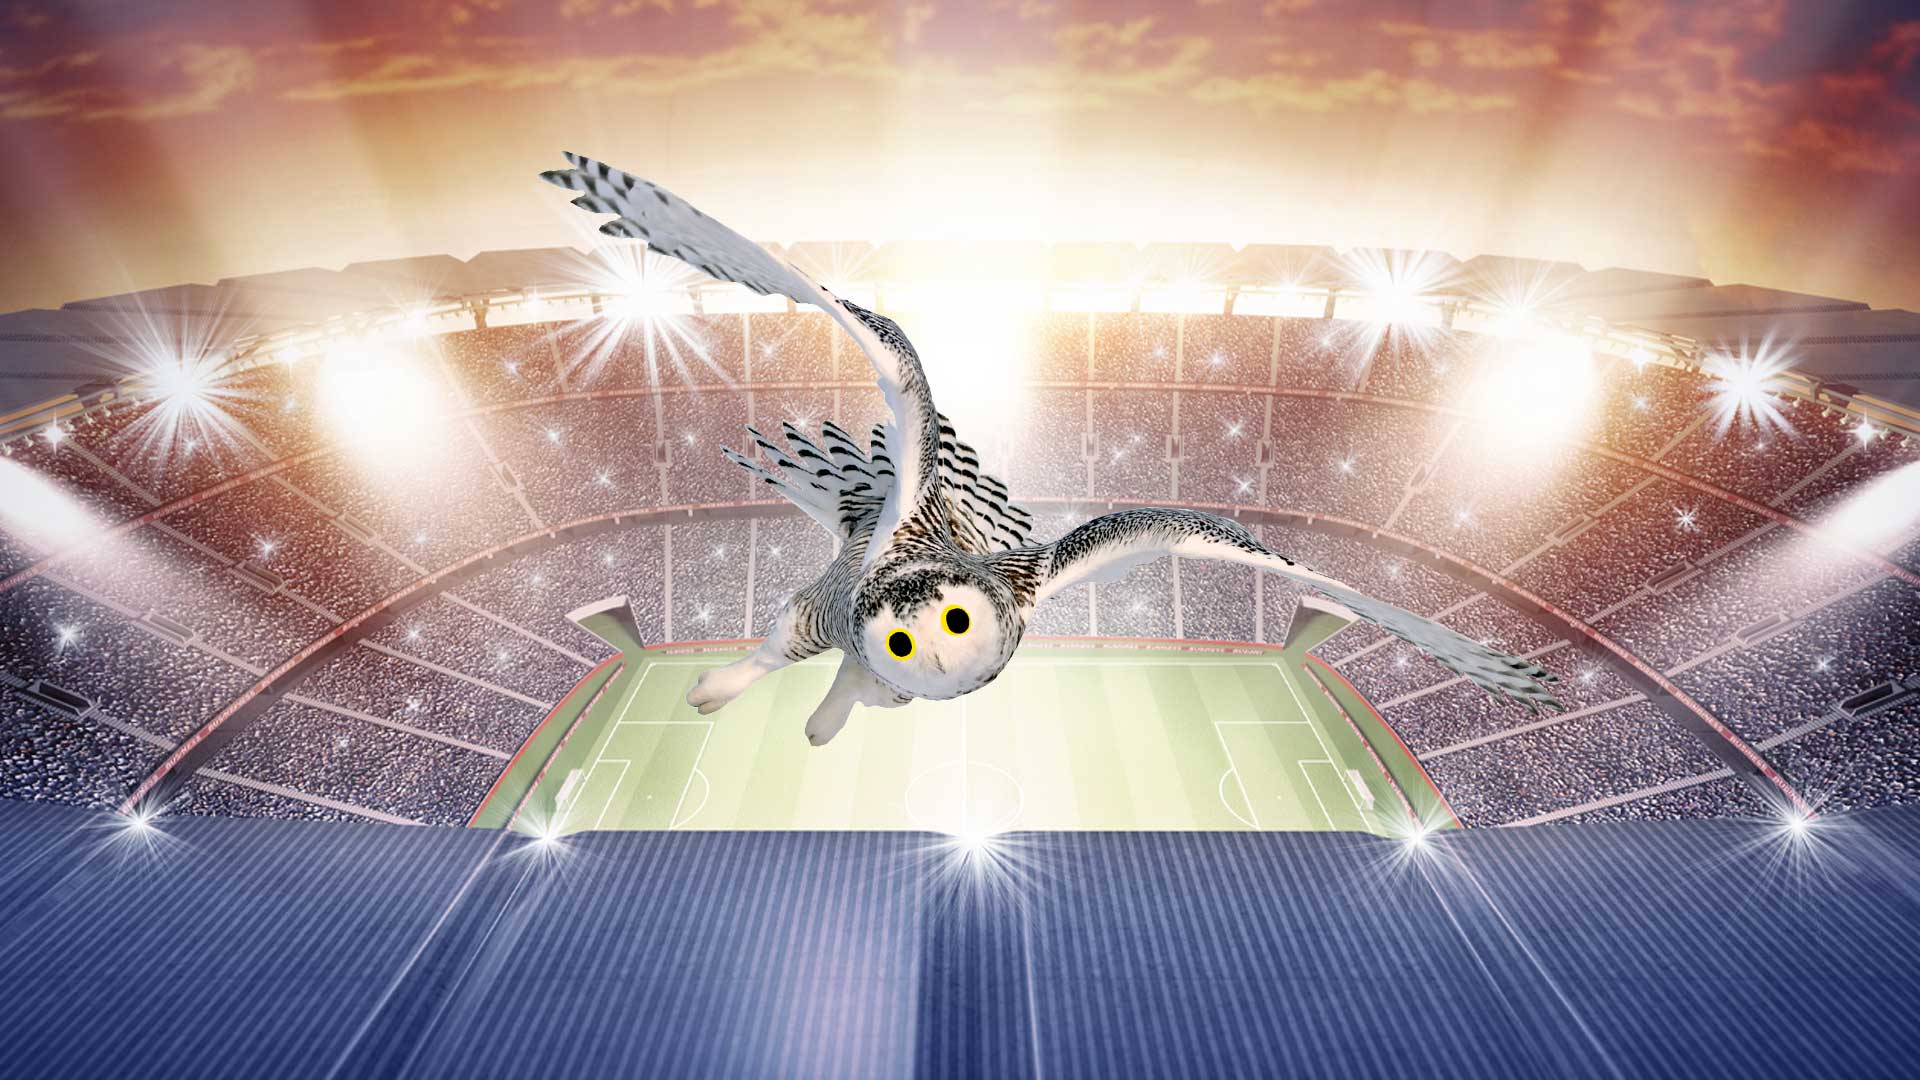 An owl swooping over a football ground at night